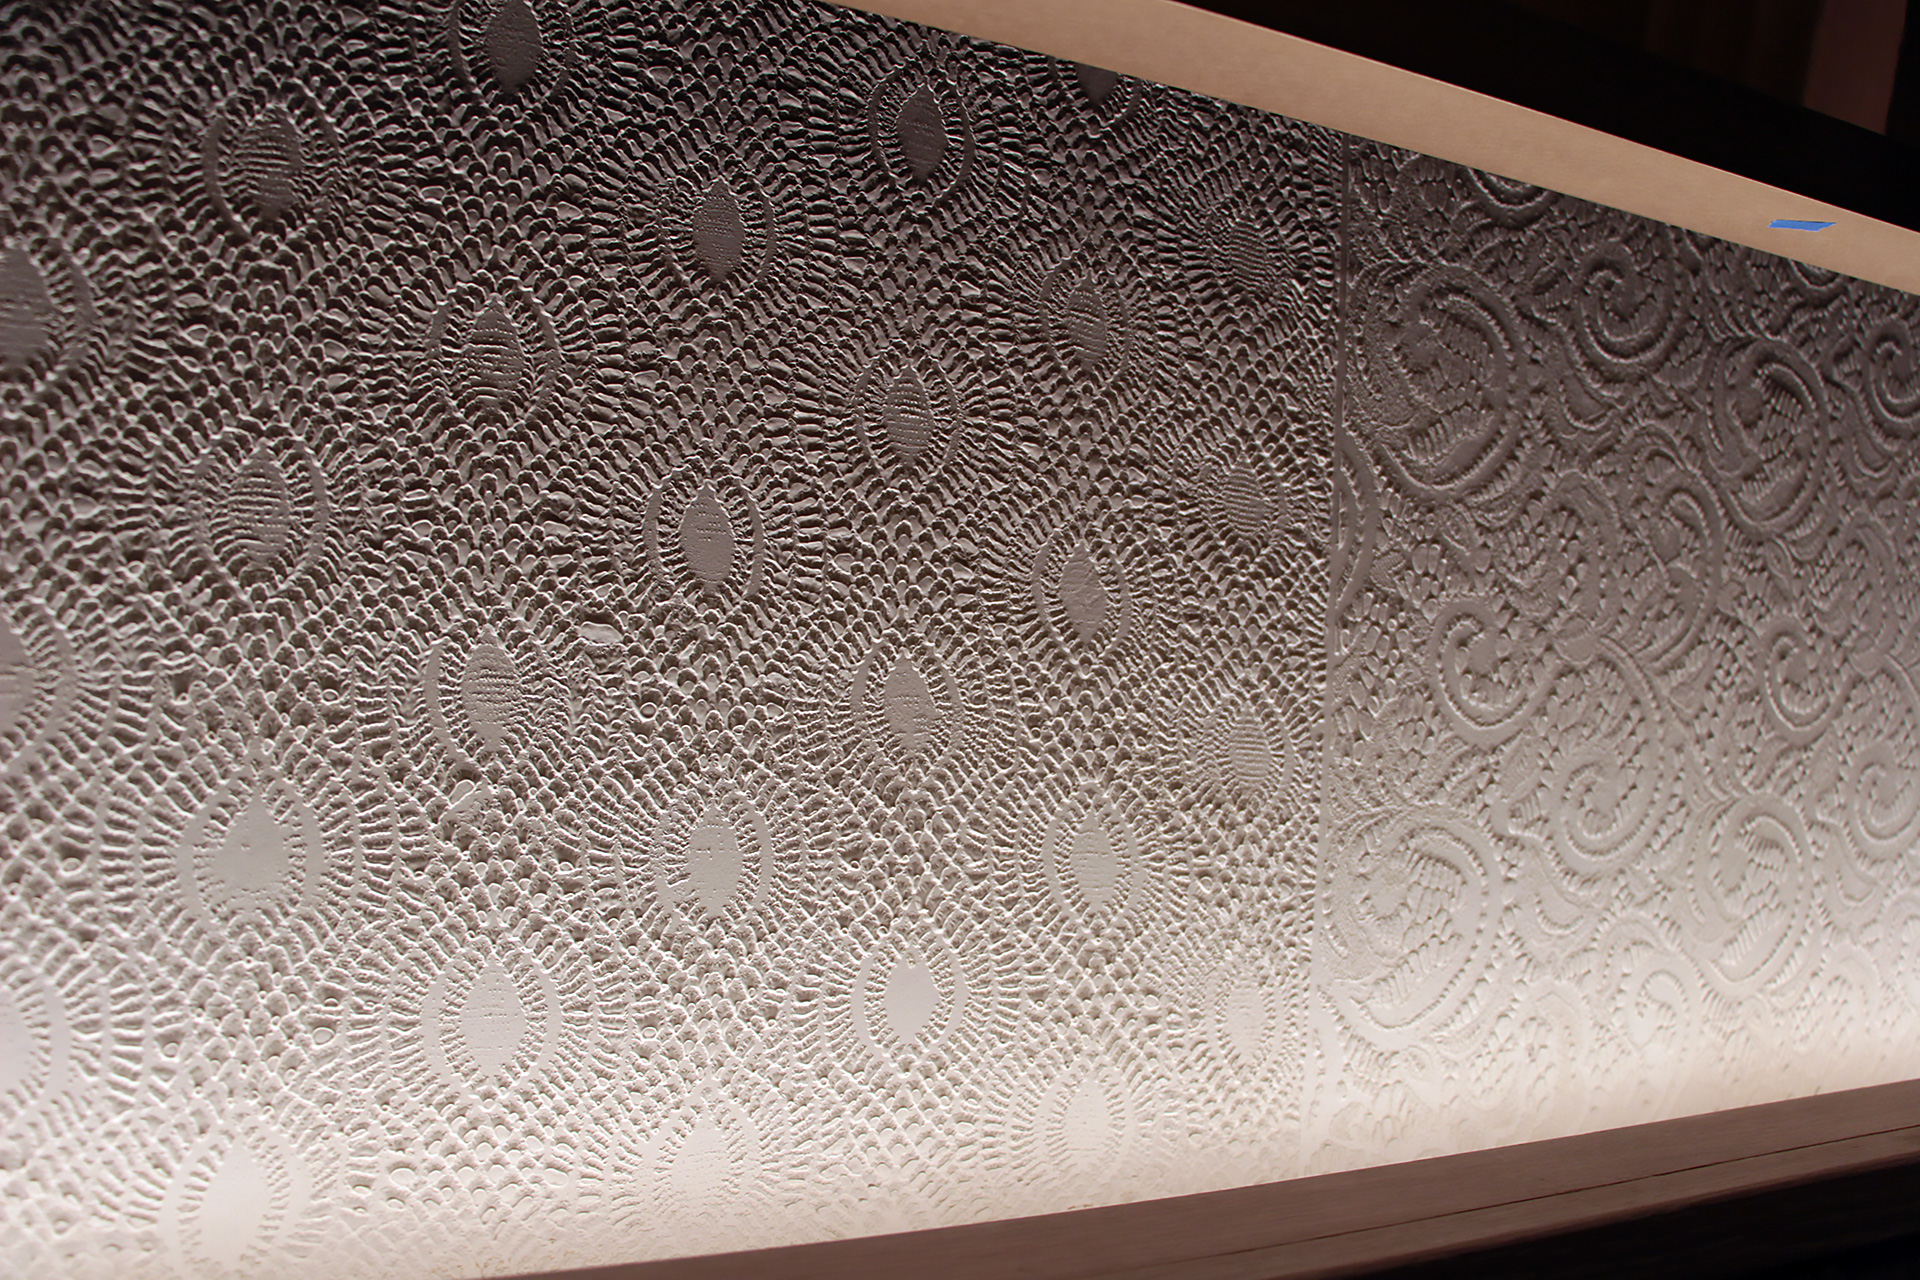 Textured walls were made using fabric from antique Chinese wedding dresses.